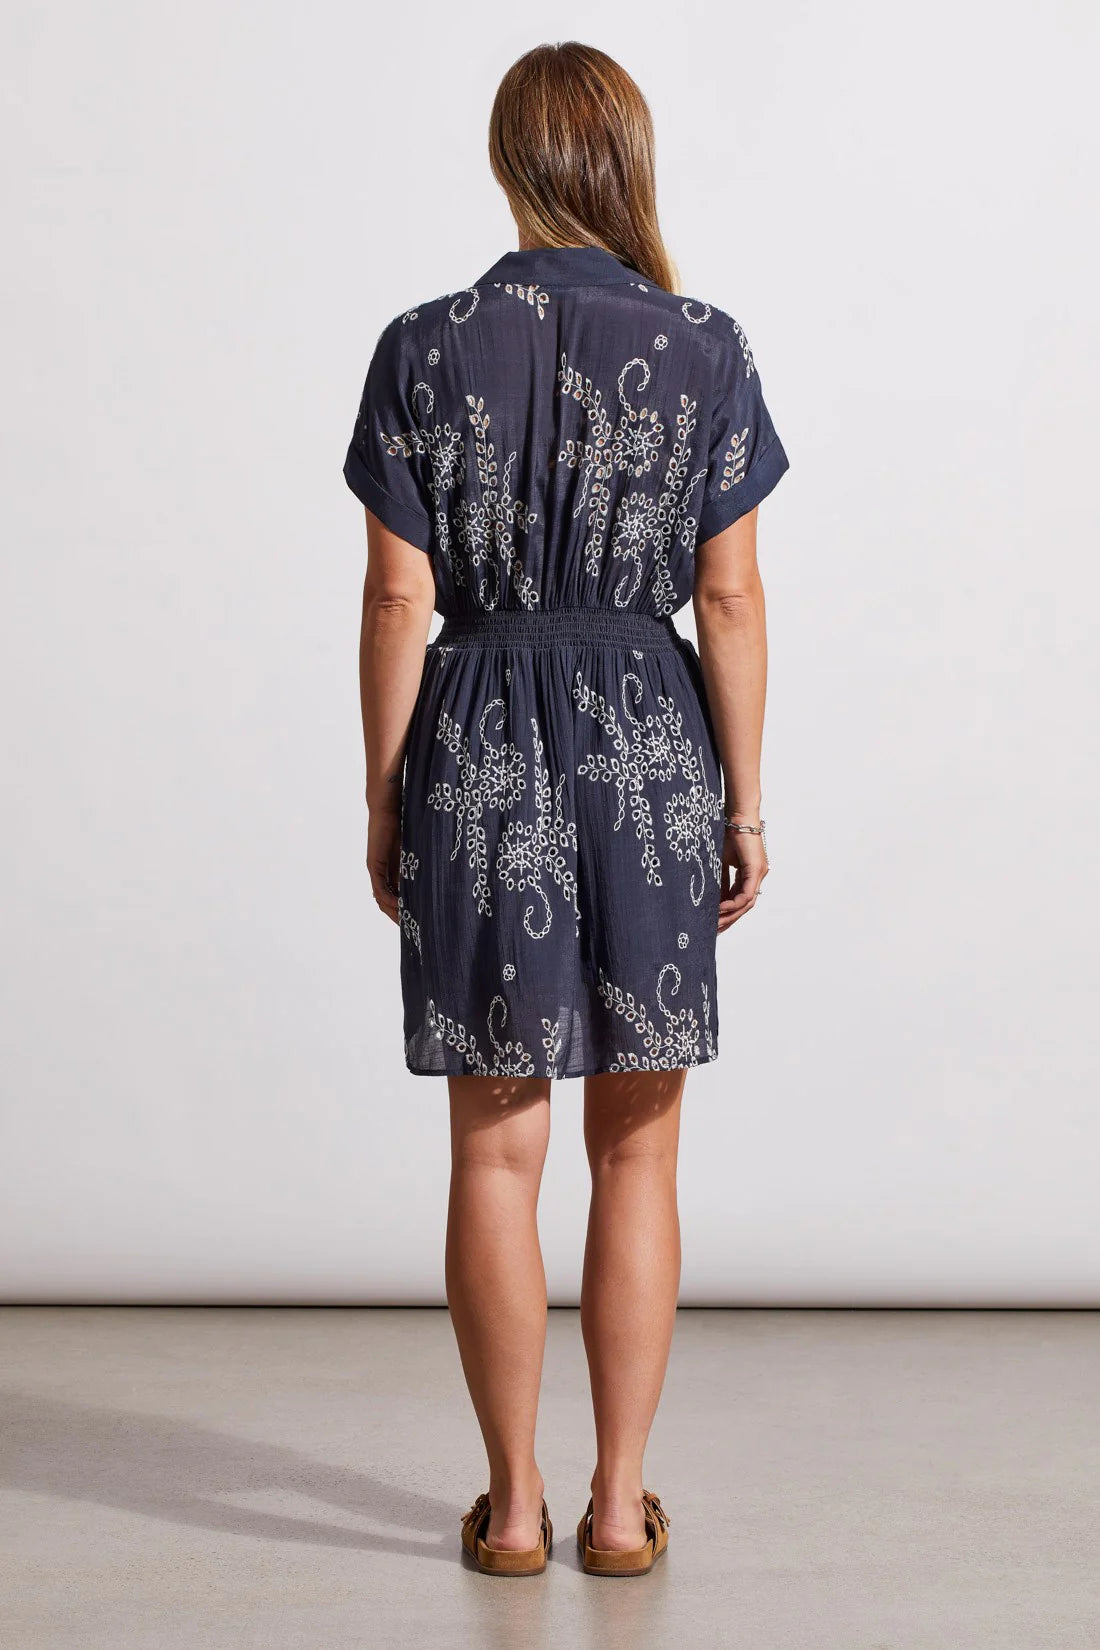 Intricated English embroidery adds a chic touch to this button-up shirt dress. A matching belt lets you adjust the fit, short kimono sleeves complete the look, and side seam pockets add a functional detail.